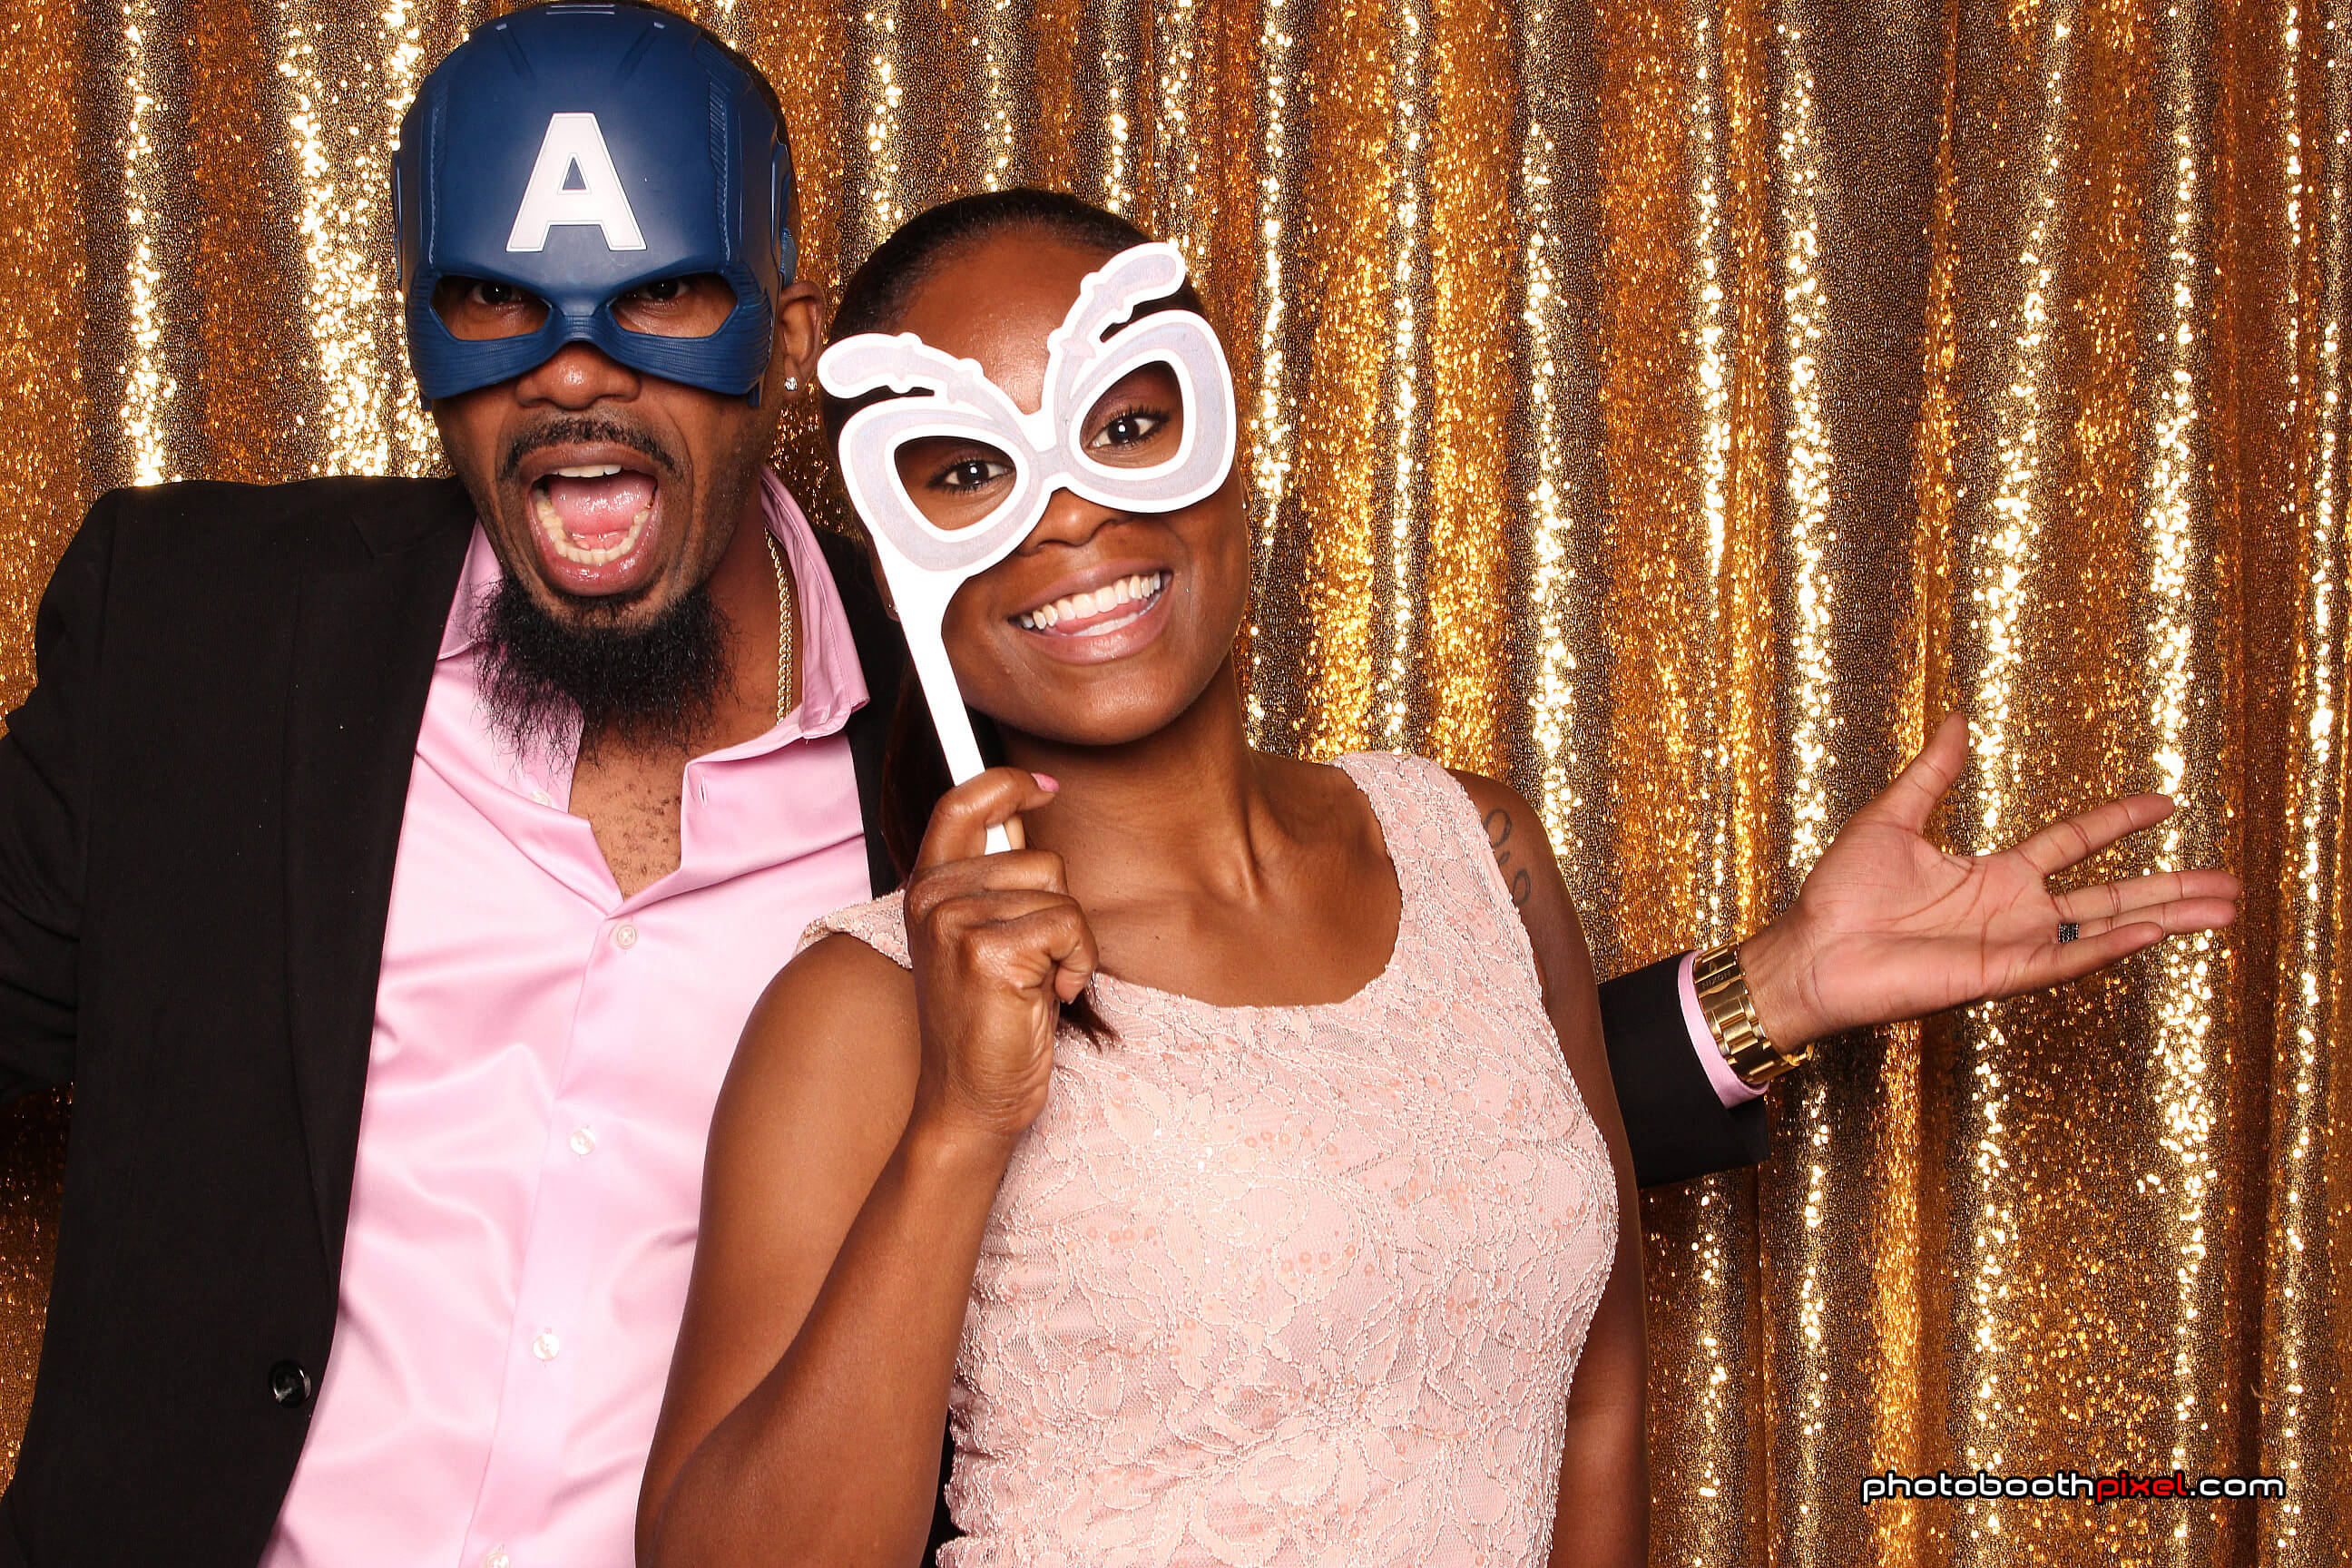 photo booth rental the haskell building jacksonville fl